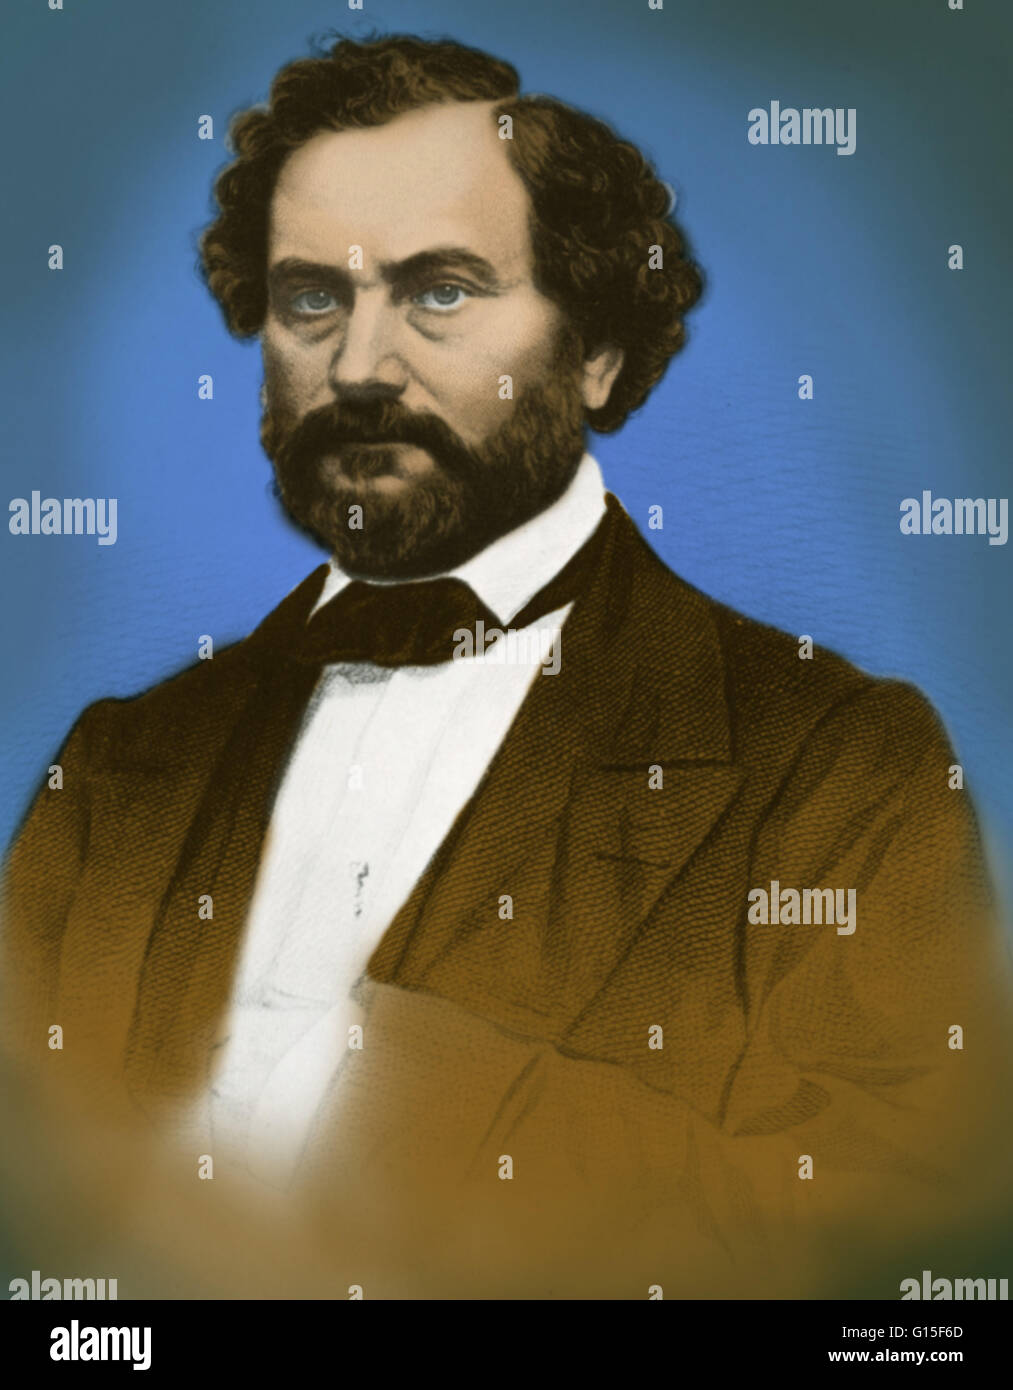 Samuel Colt (1814 -1862) was an American inventor and industrialist. He was the founder of Colt's Patent Fire-Arms Manufacturing Company (Colt's Manufacturing Company), and is widely credited with popularizing the revolver. In 2006, he was inducted into t Stock Photo